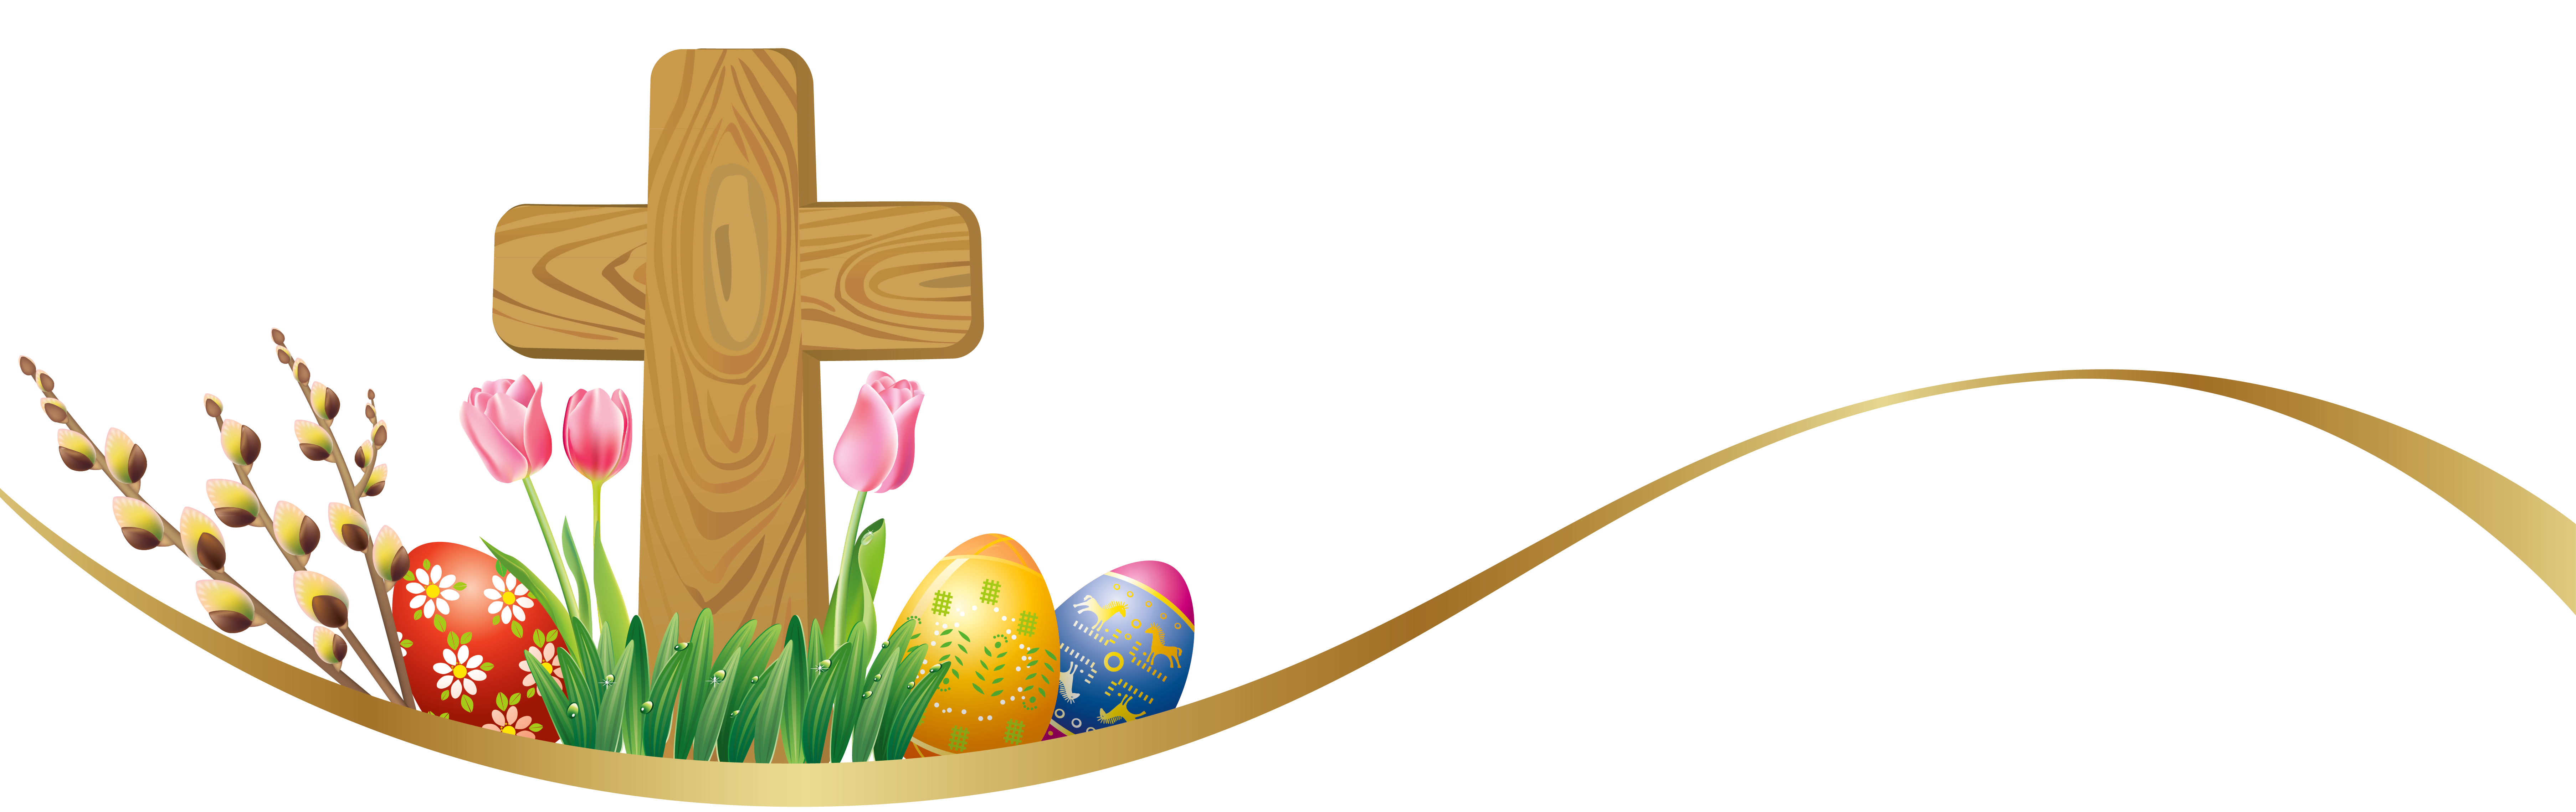 easter cross free clipart - photo #36